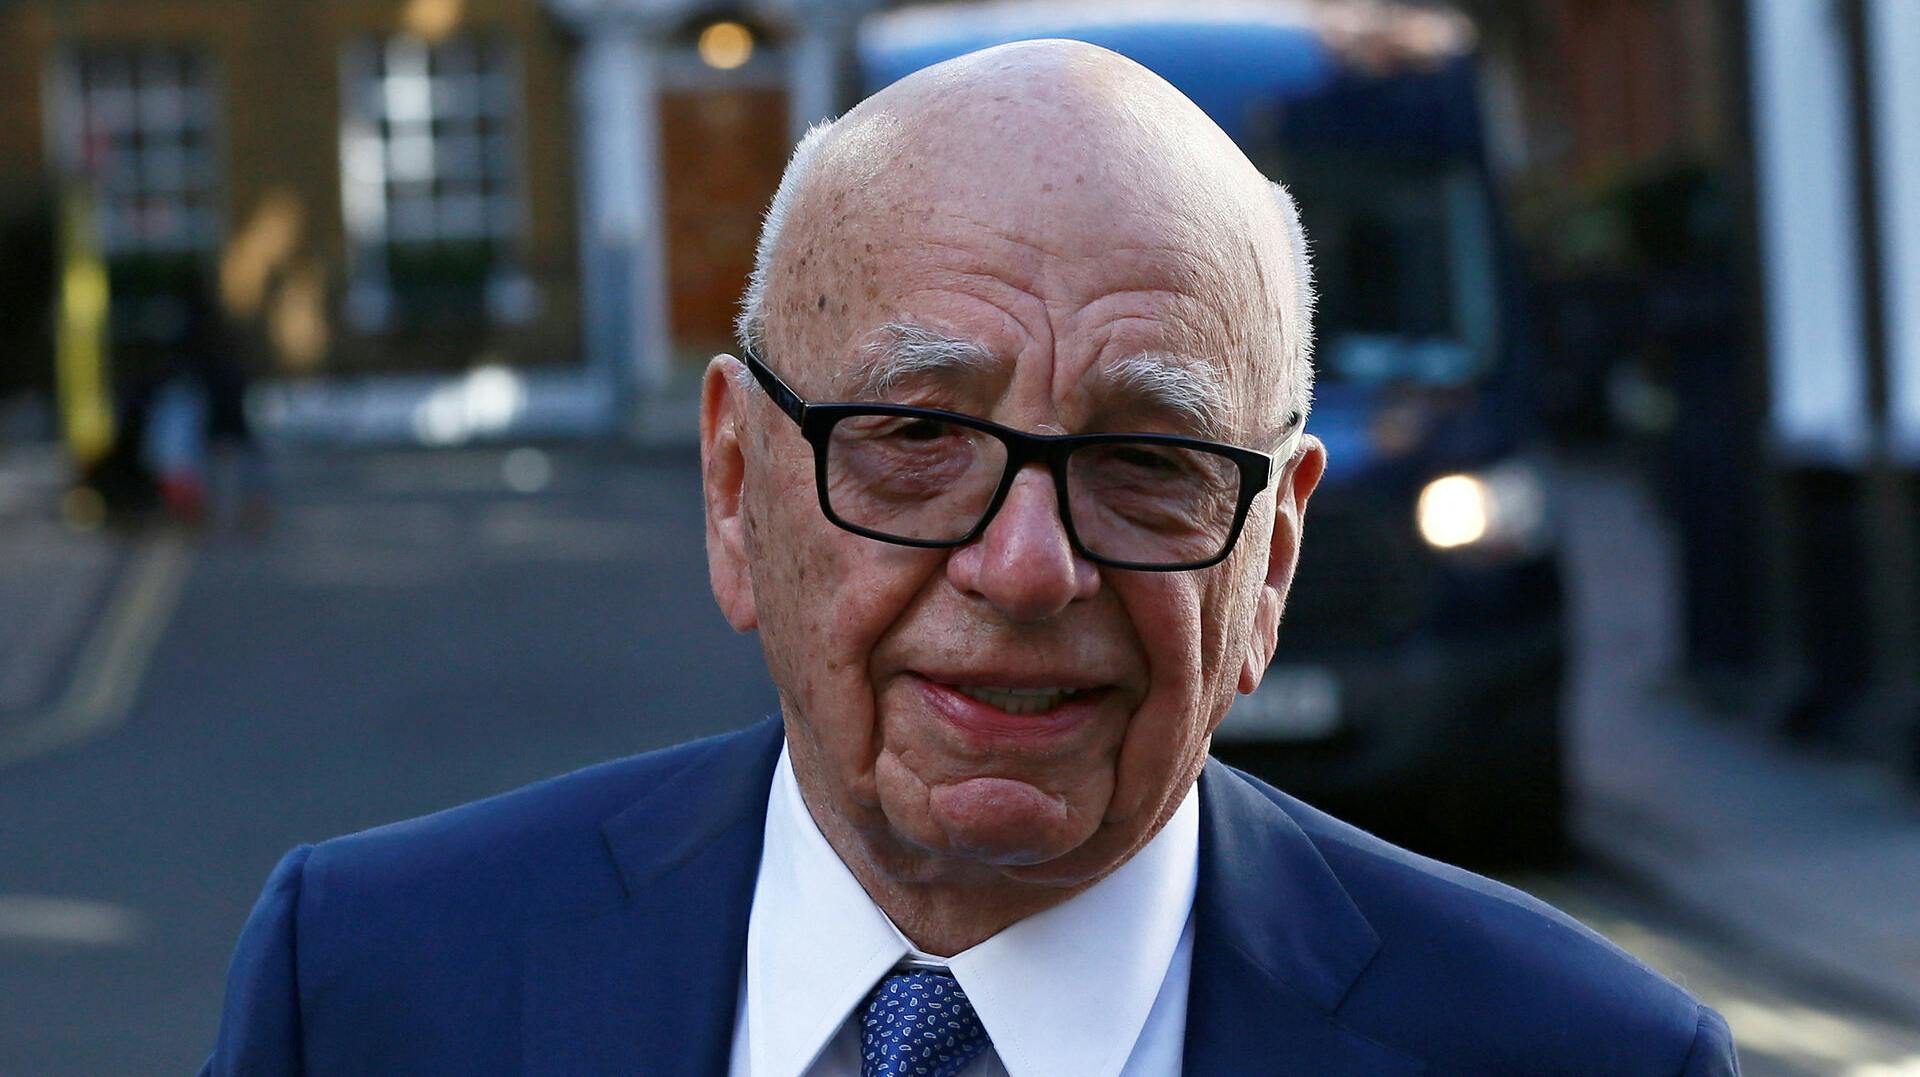 FILE PHOTO: Media mogul Rupert Murdoch leaves his home in London, Britain March 4, 2016. Murdoch wed former supermodel Jerry Hall in a low-key ceremony in central London on Friday, the fourth marriage for the media mogul. REUTERS/Stefan Wermuth/File Photo